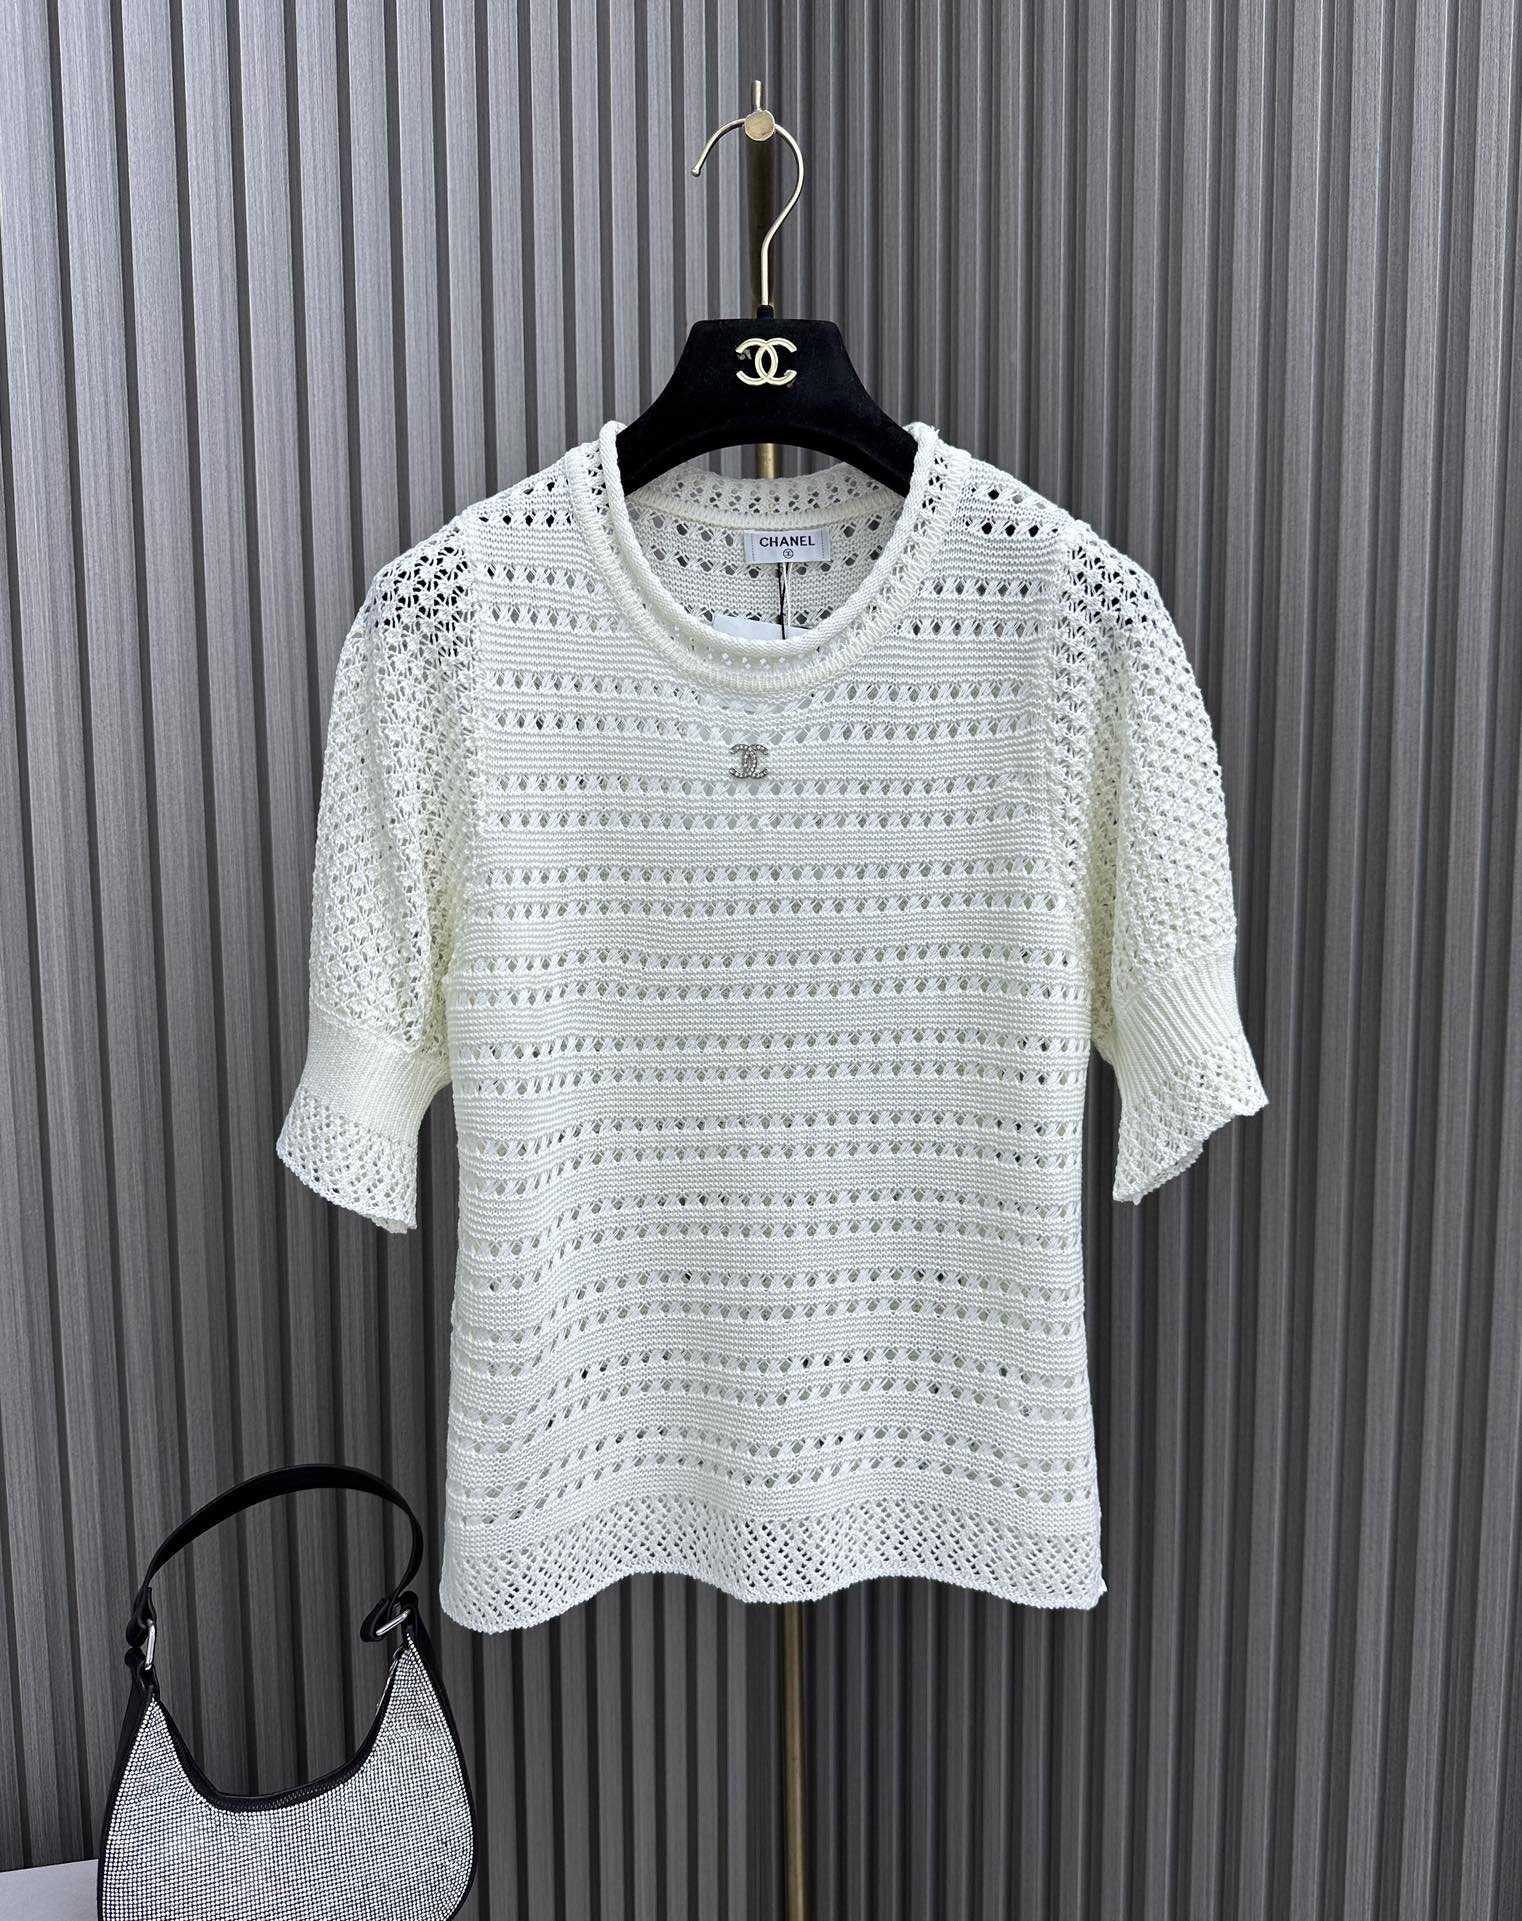 Wholesale Replica Shop
 Chanel Buy
 Clothing Shirts & Blouses Openwork Cotton Knitting